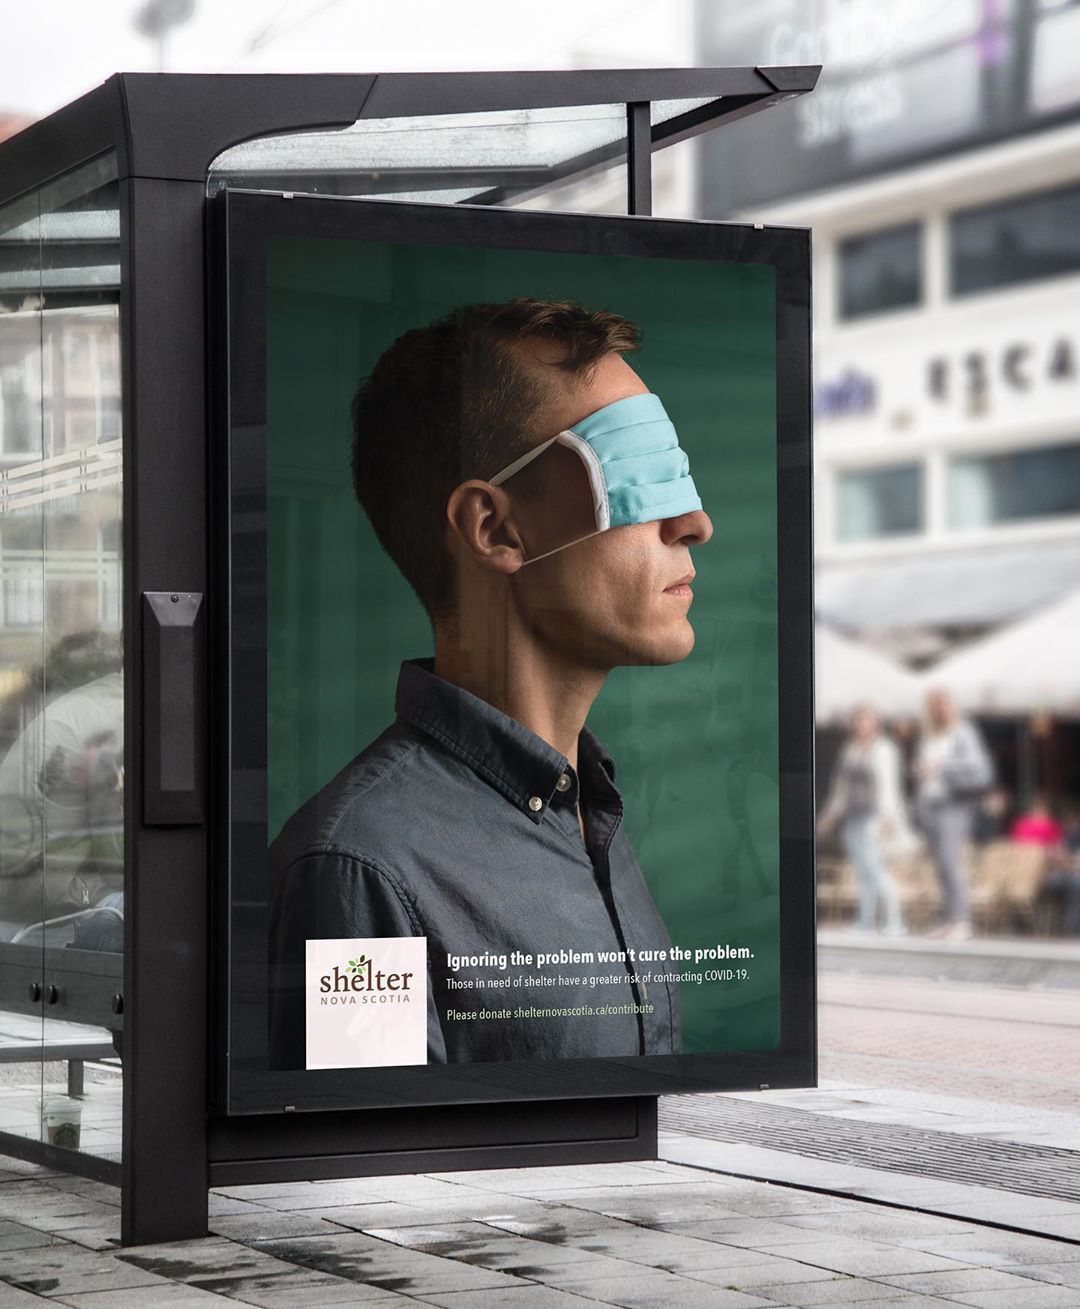 Bus stop advertisement on busy street for Shelter Nova Scotia with man blinded by COVID face mask resting over his eyes. 